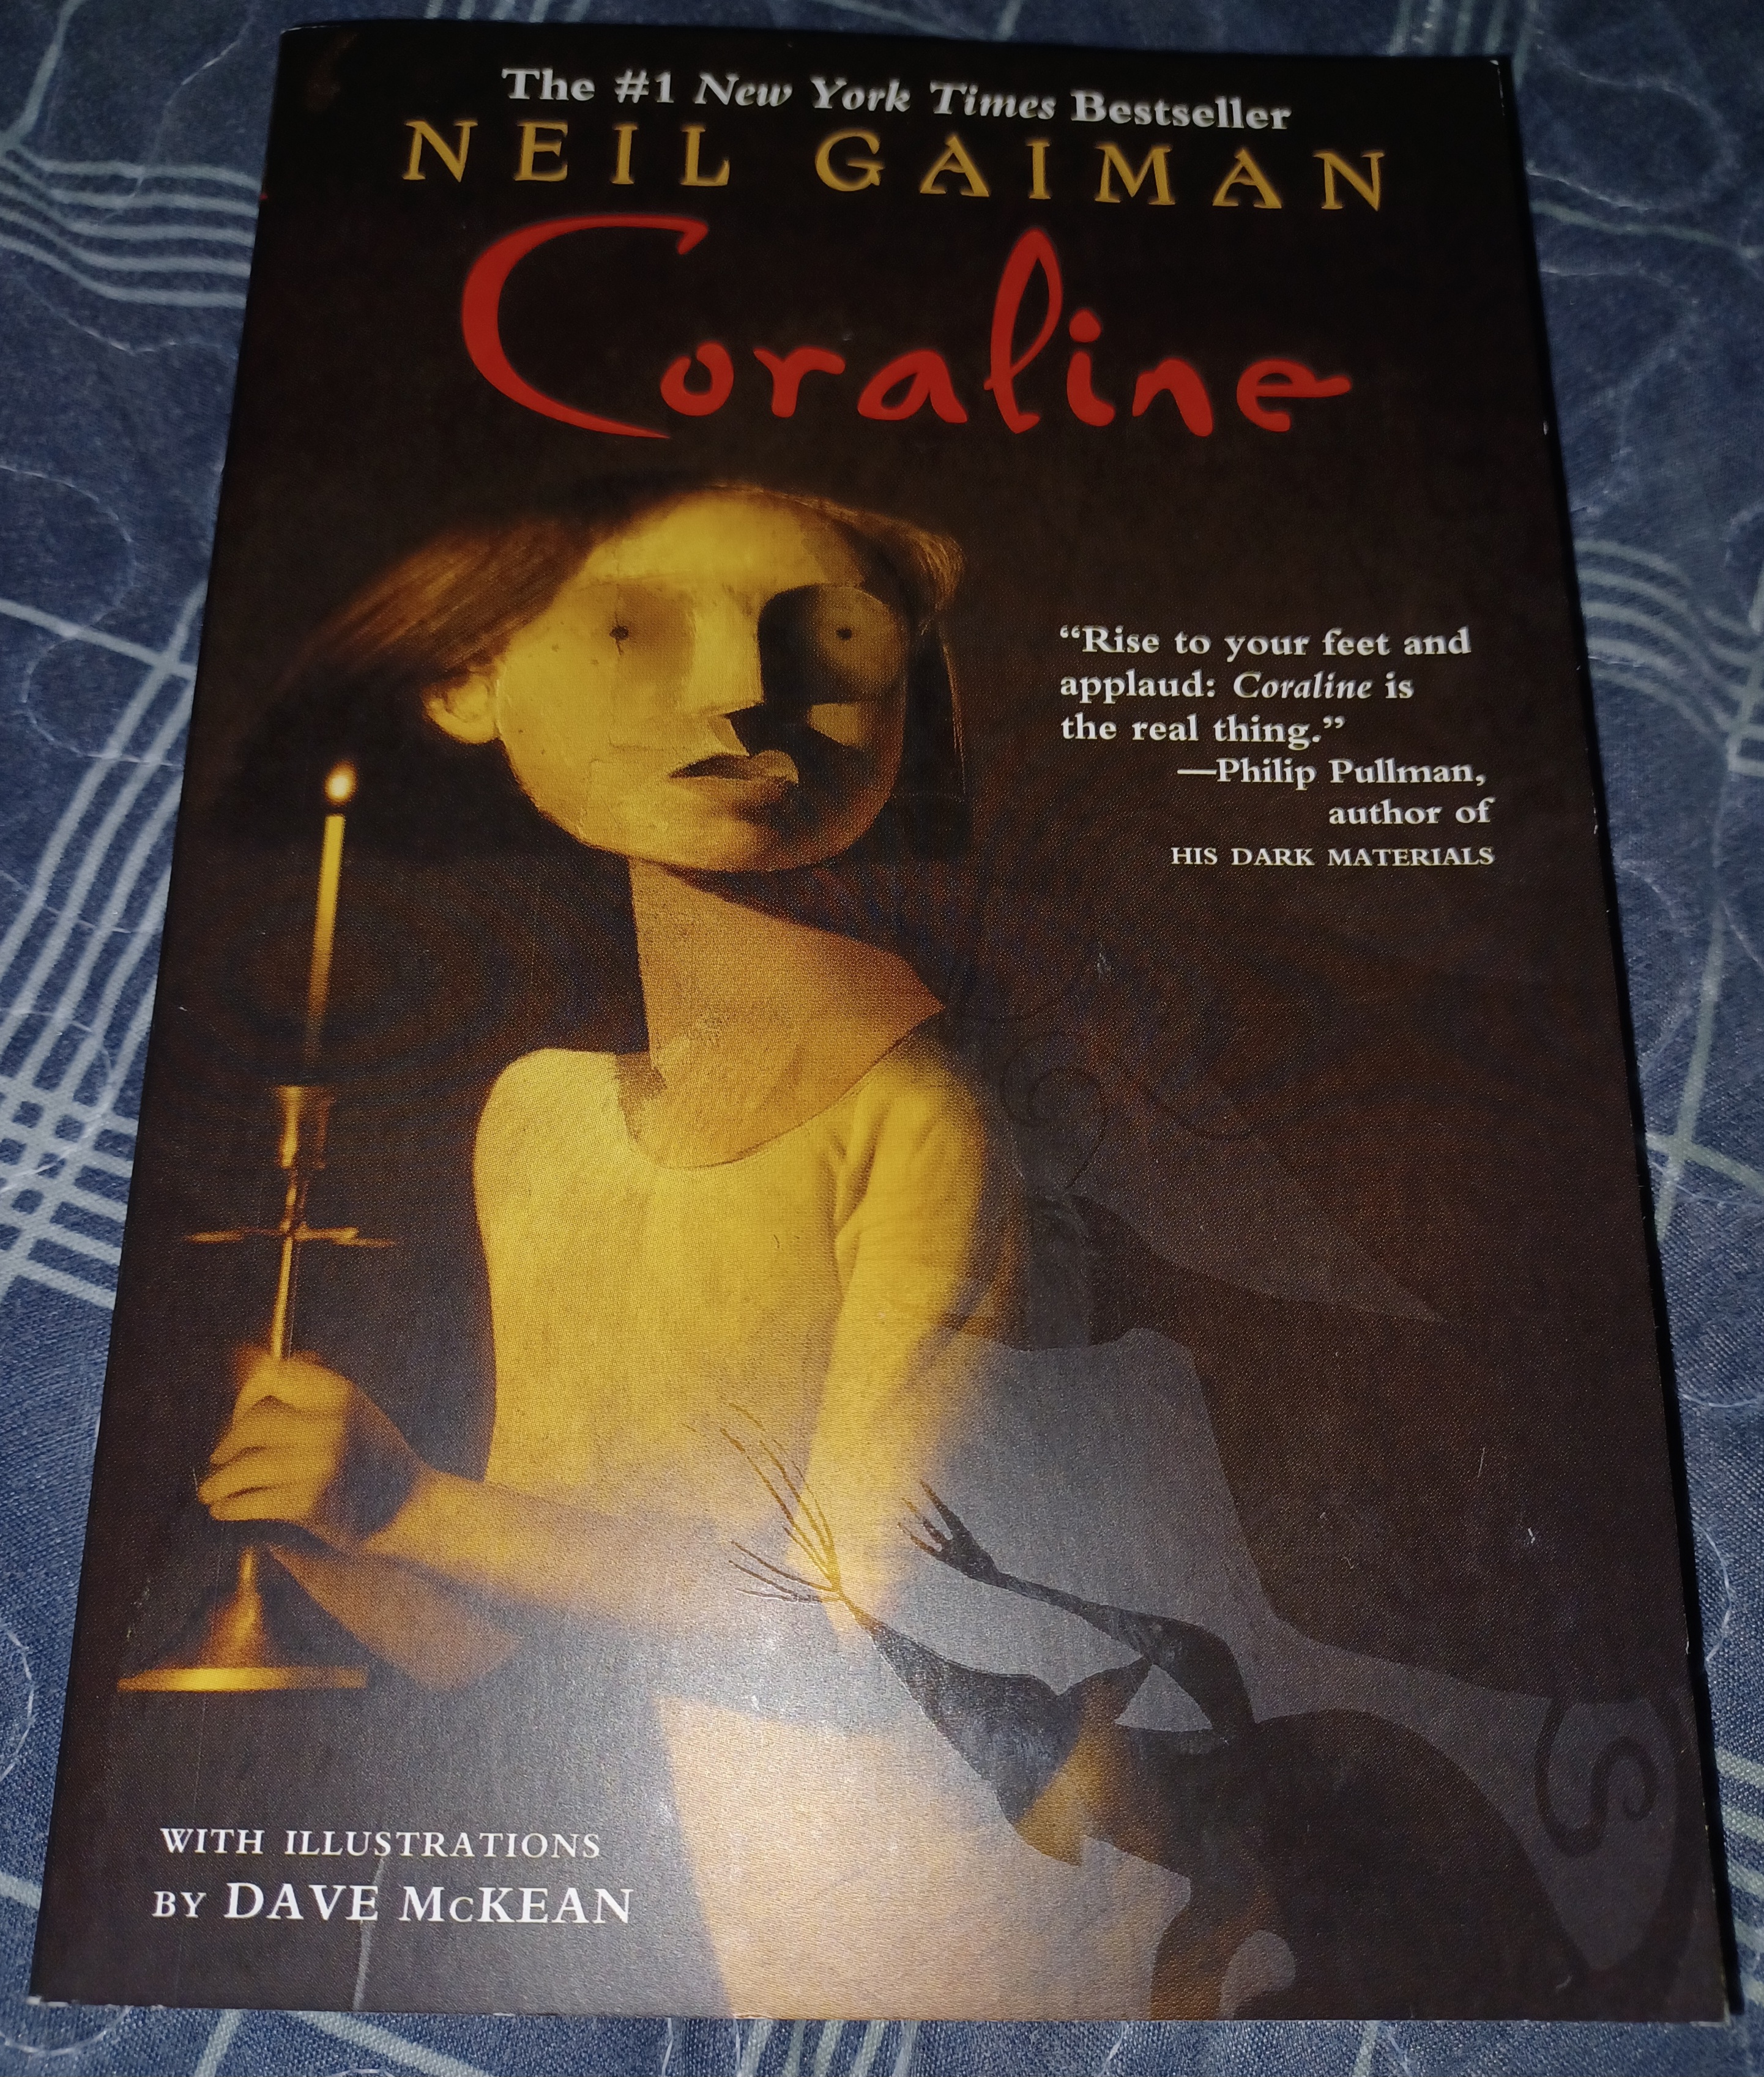 Coraline book by sepilloIsCool1234 on DeviantArt